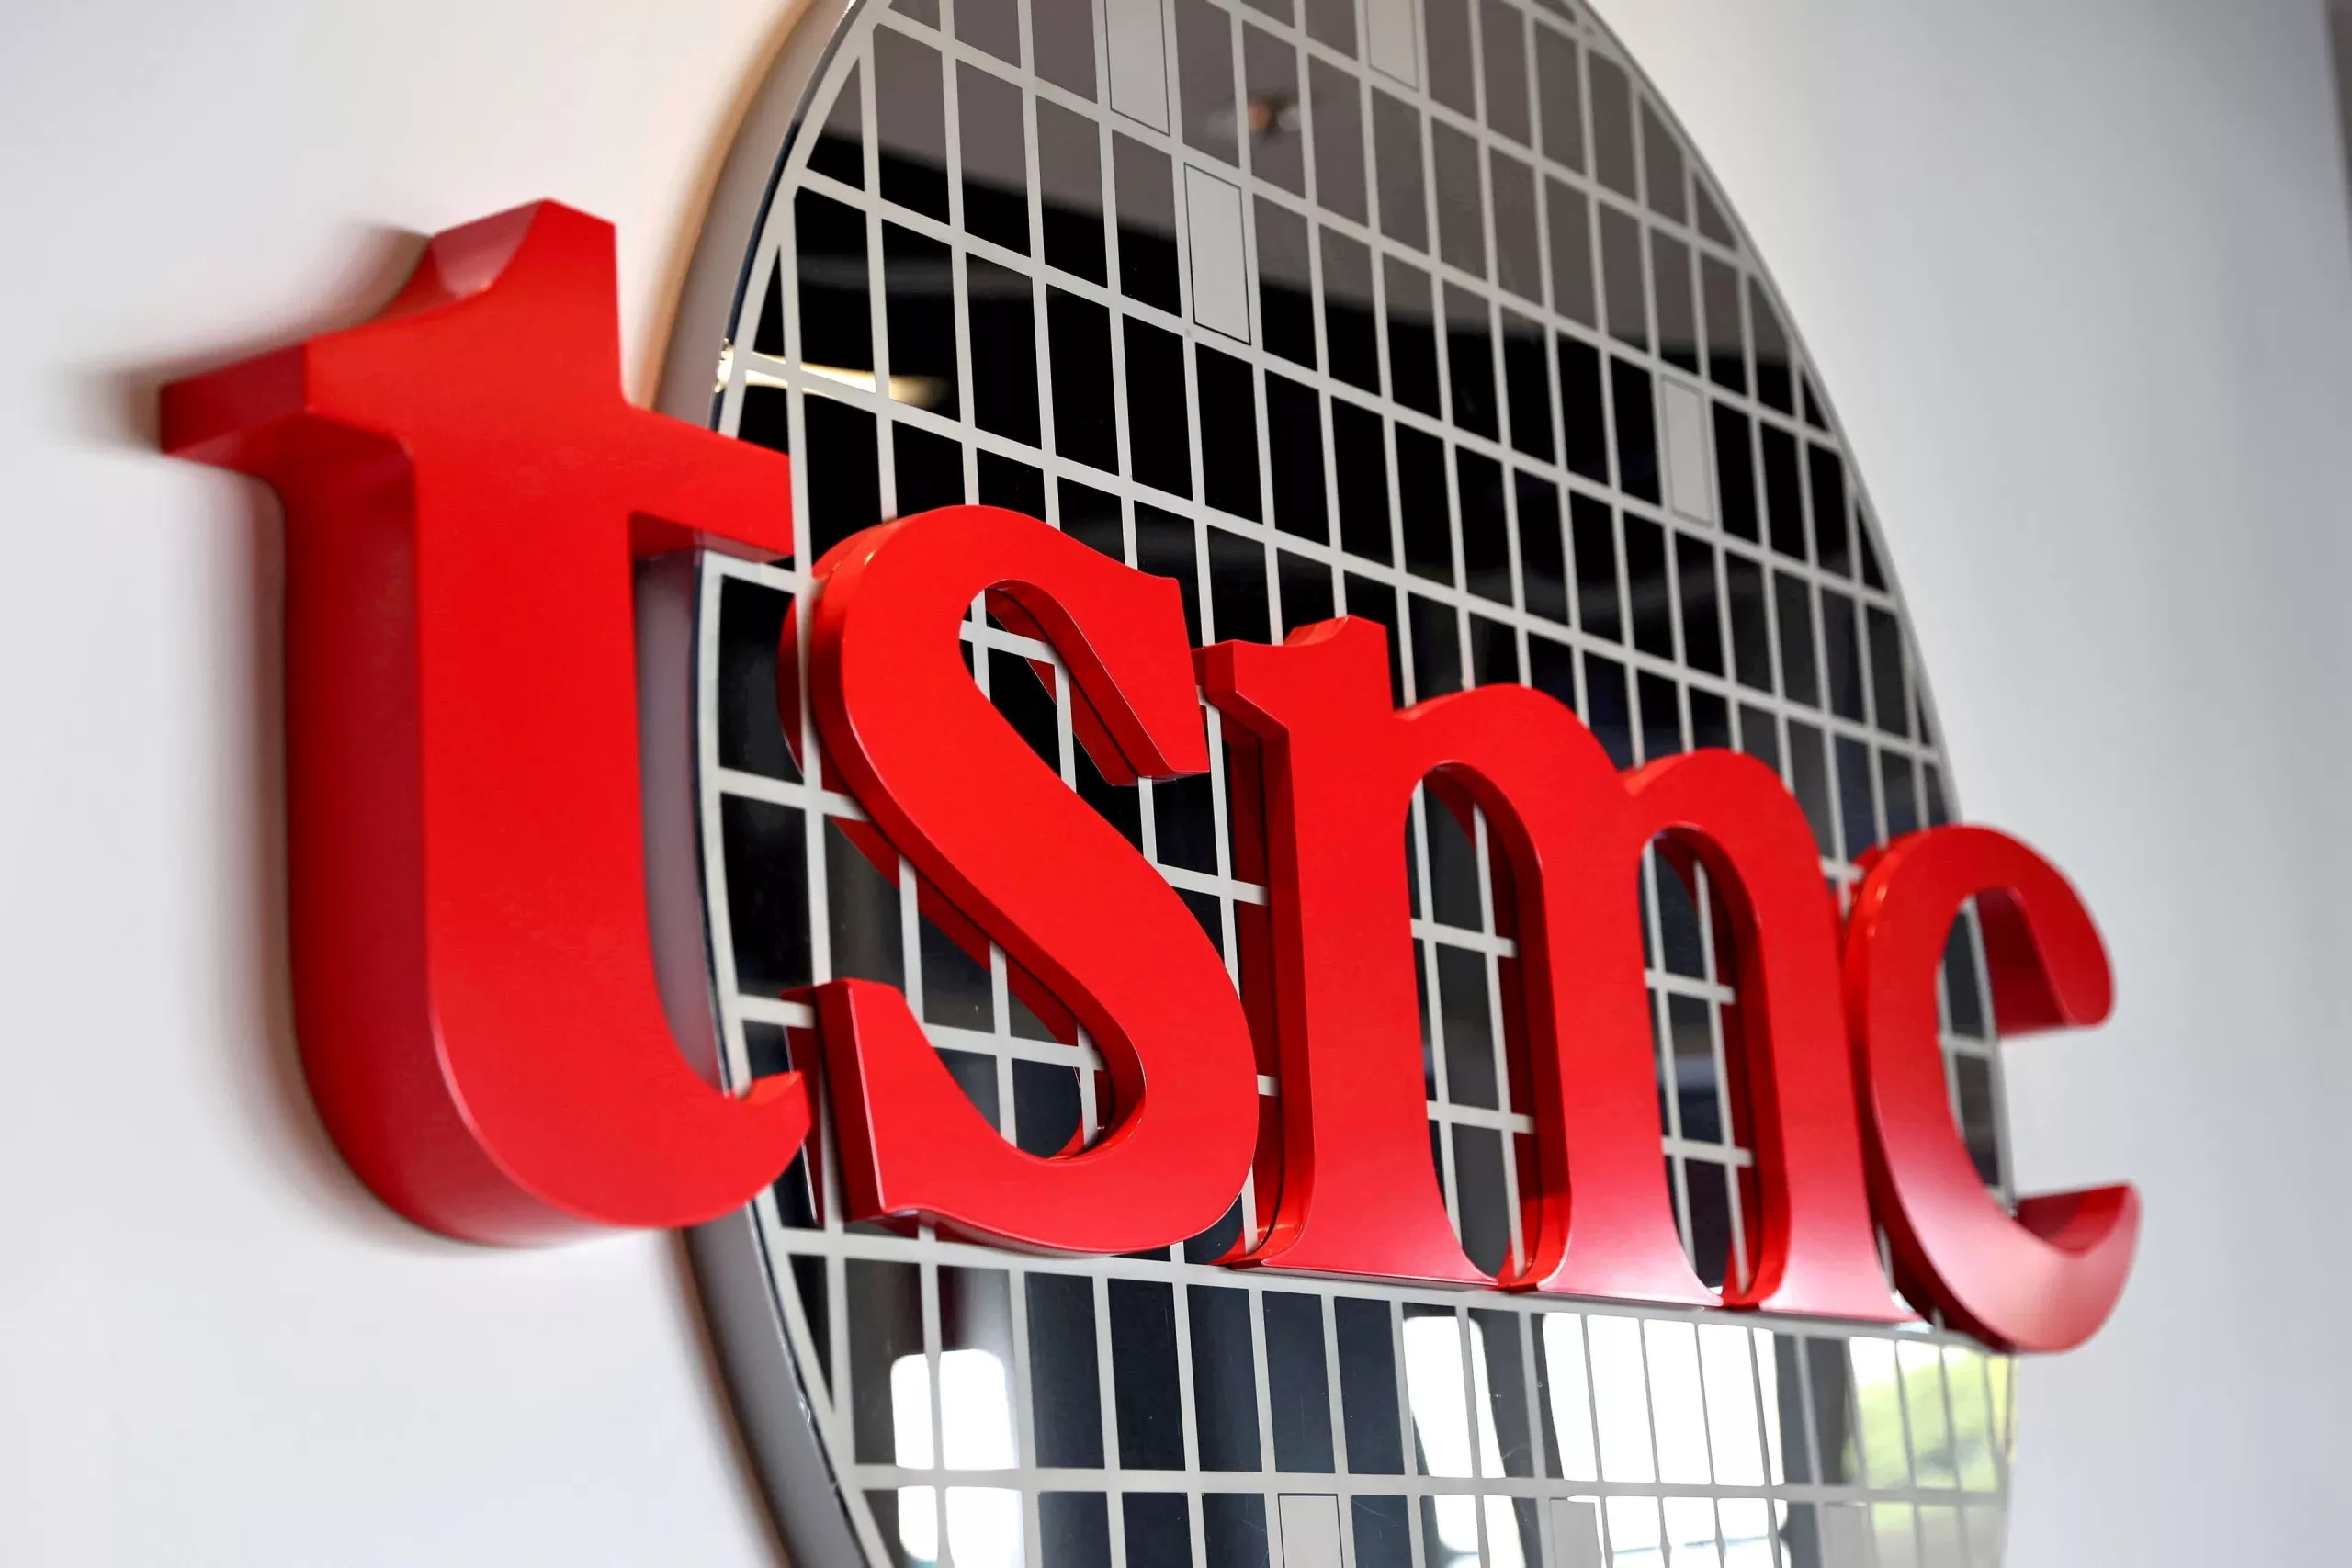 TSMC will localize some neon production to secure the global supply